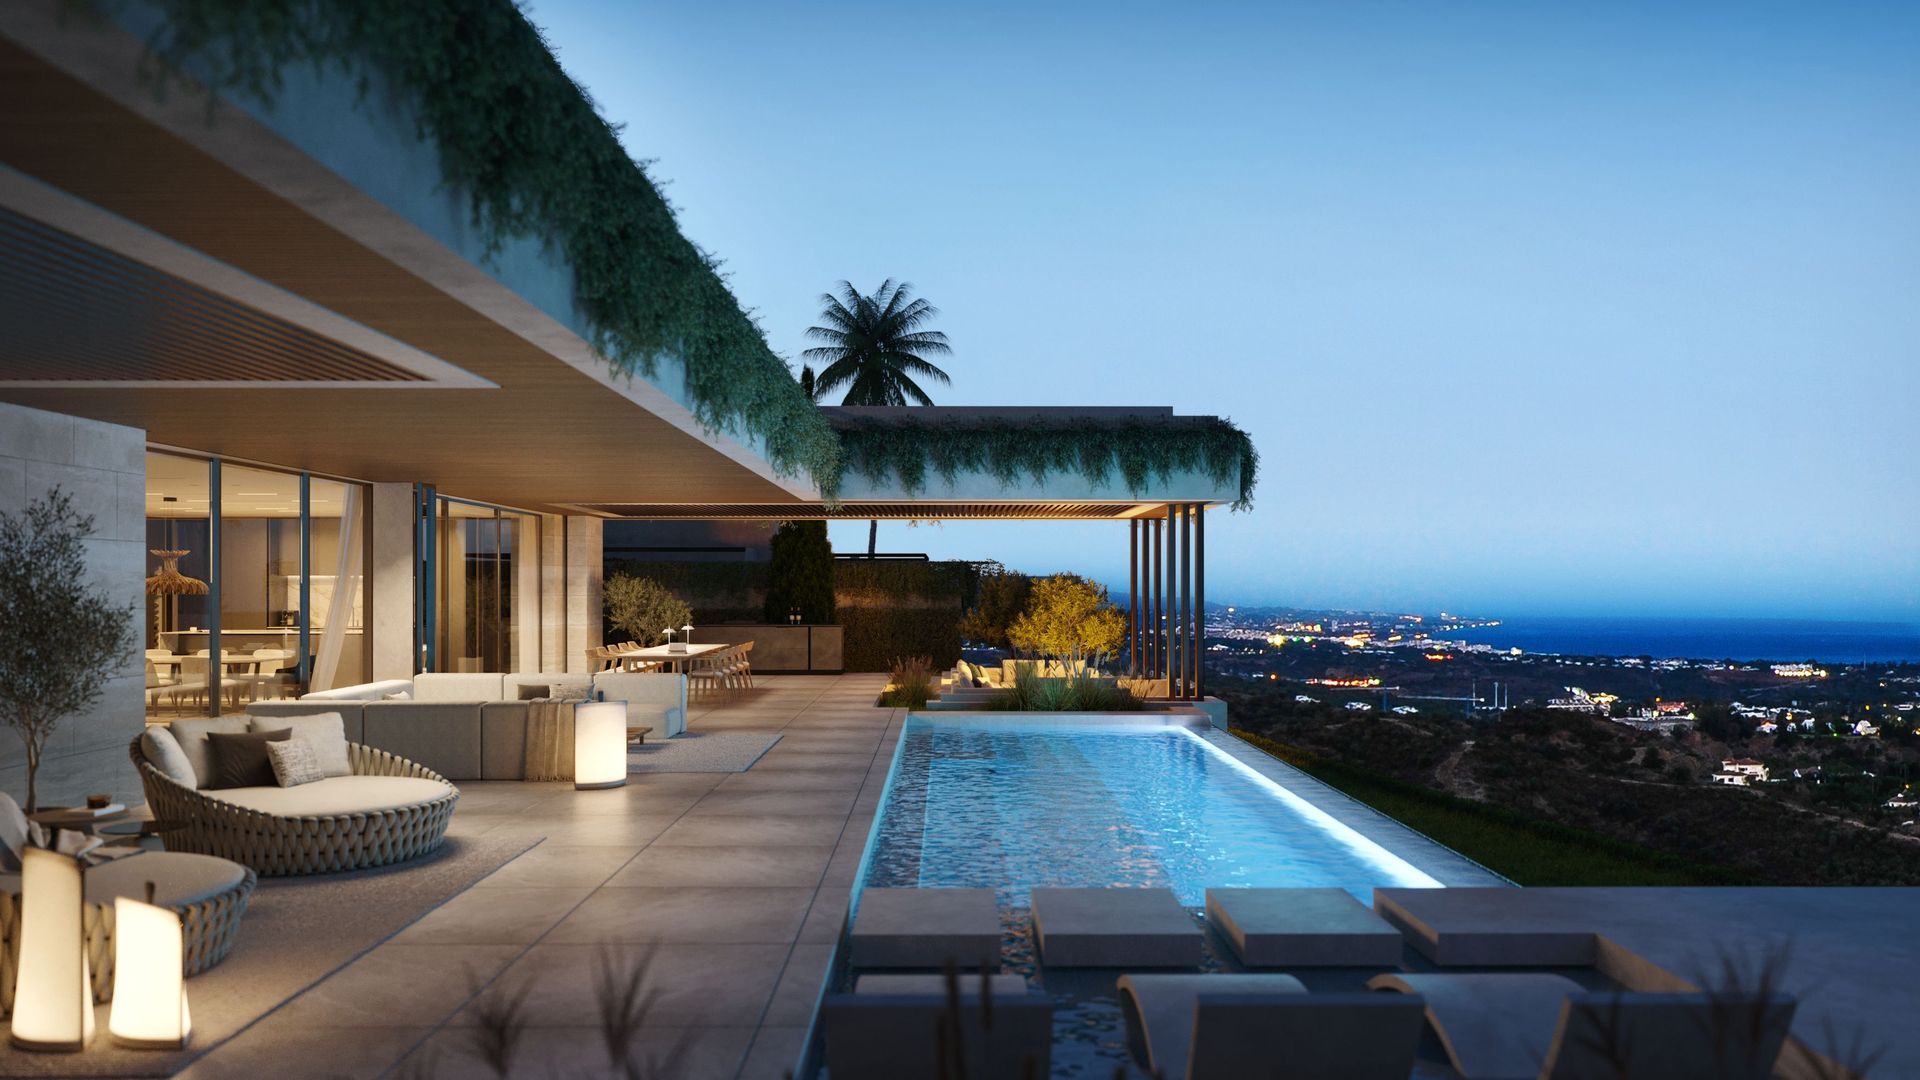 One of the most exciting property launches in Marbella, Benahavis